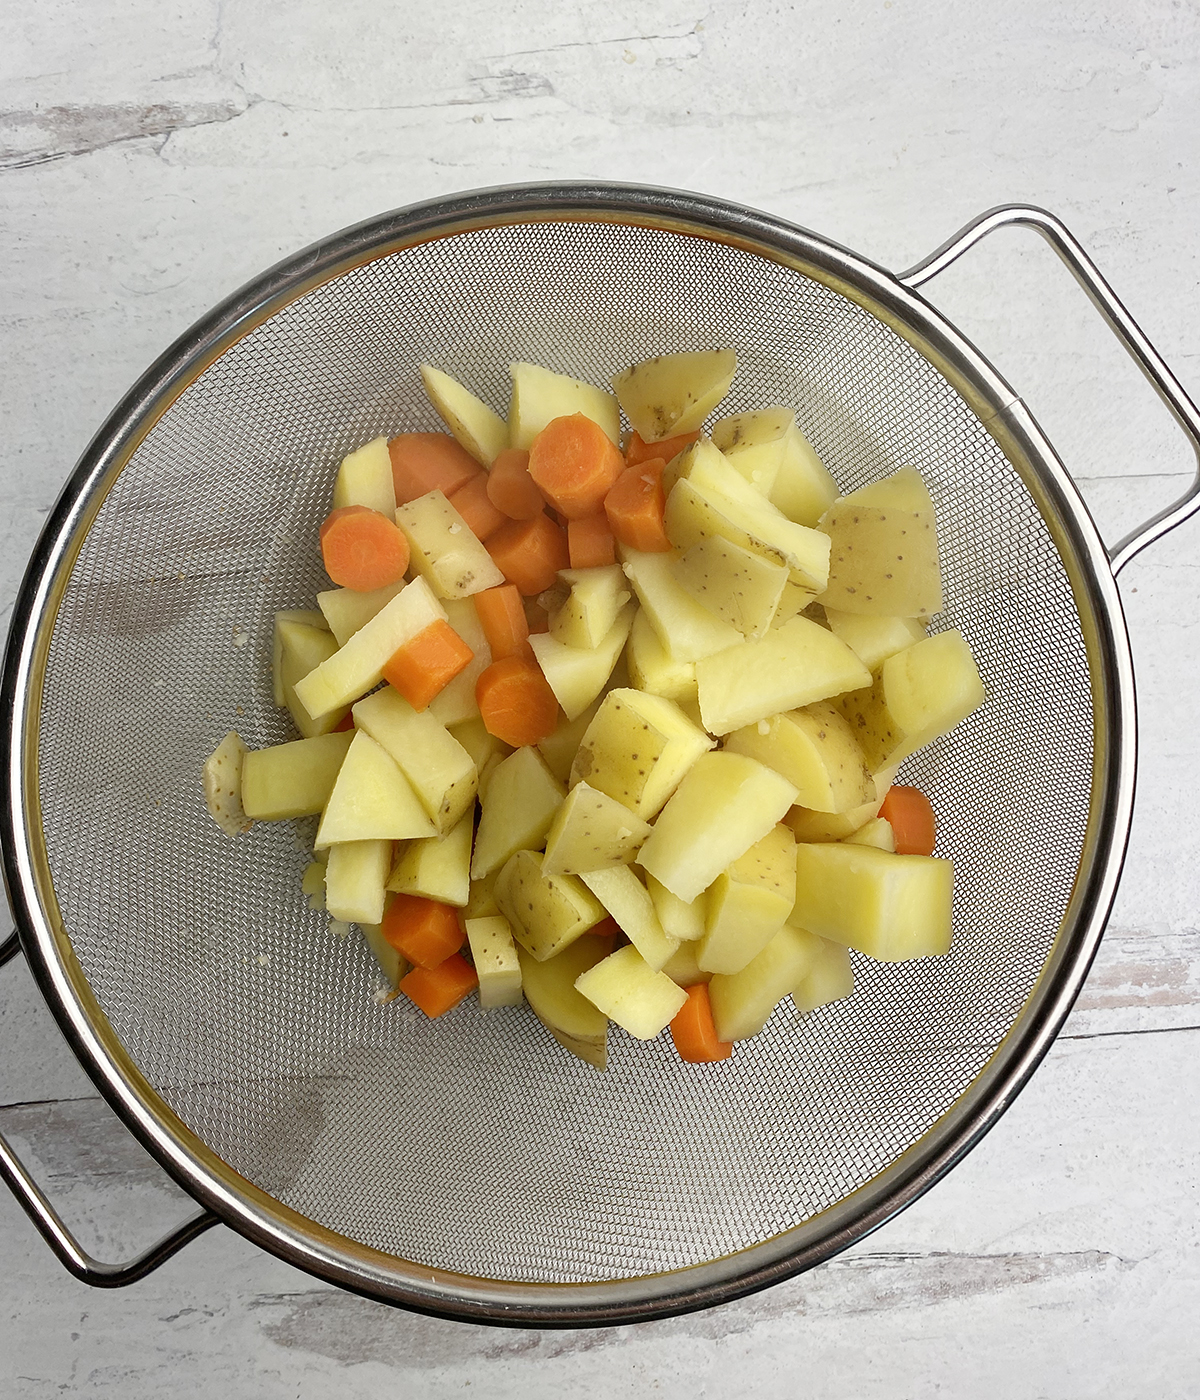 Carrots and potatoes cooling in a strainer.